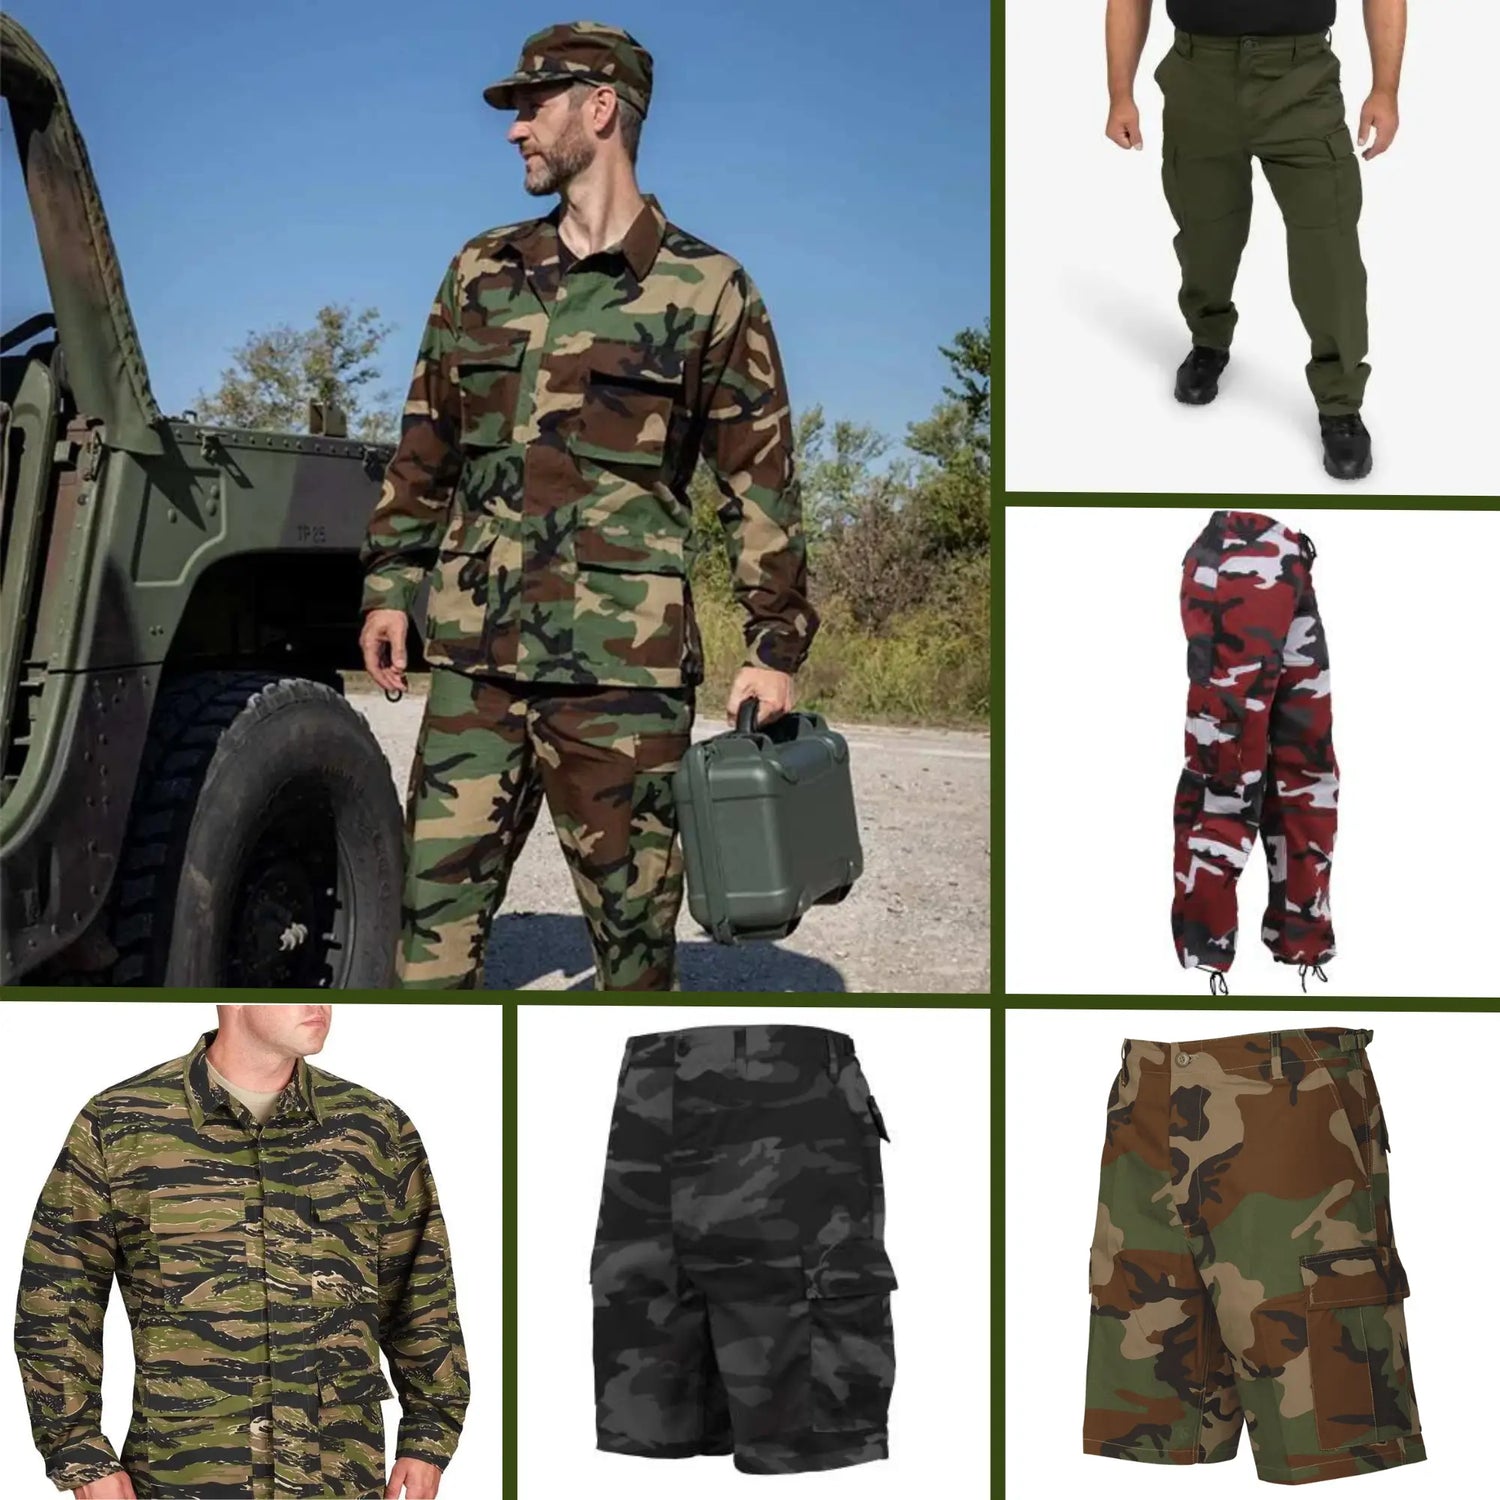 Army Navy Gear, Military Surplus, Tactical & Outdoor Gear